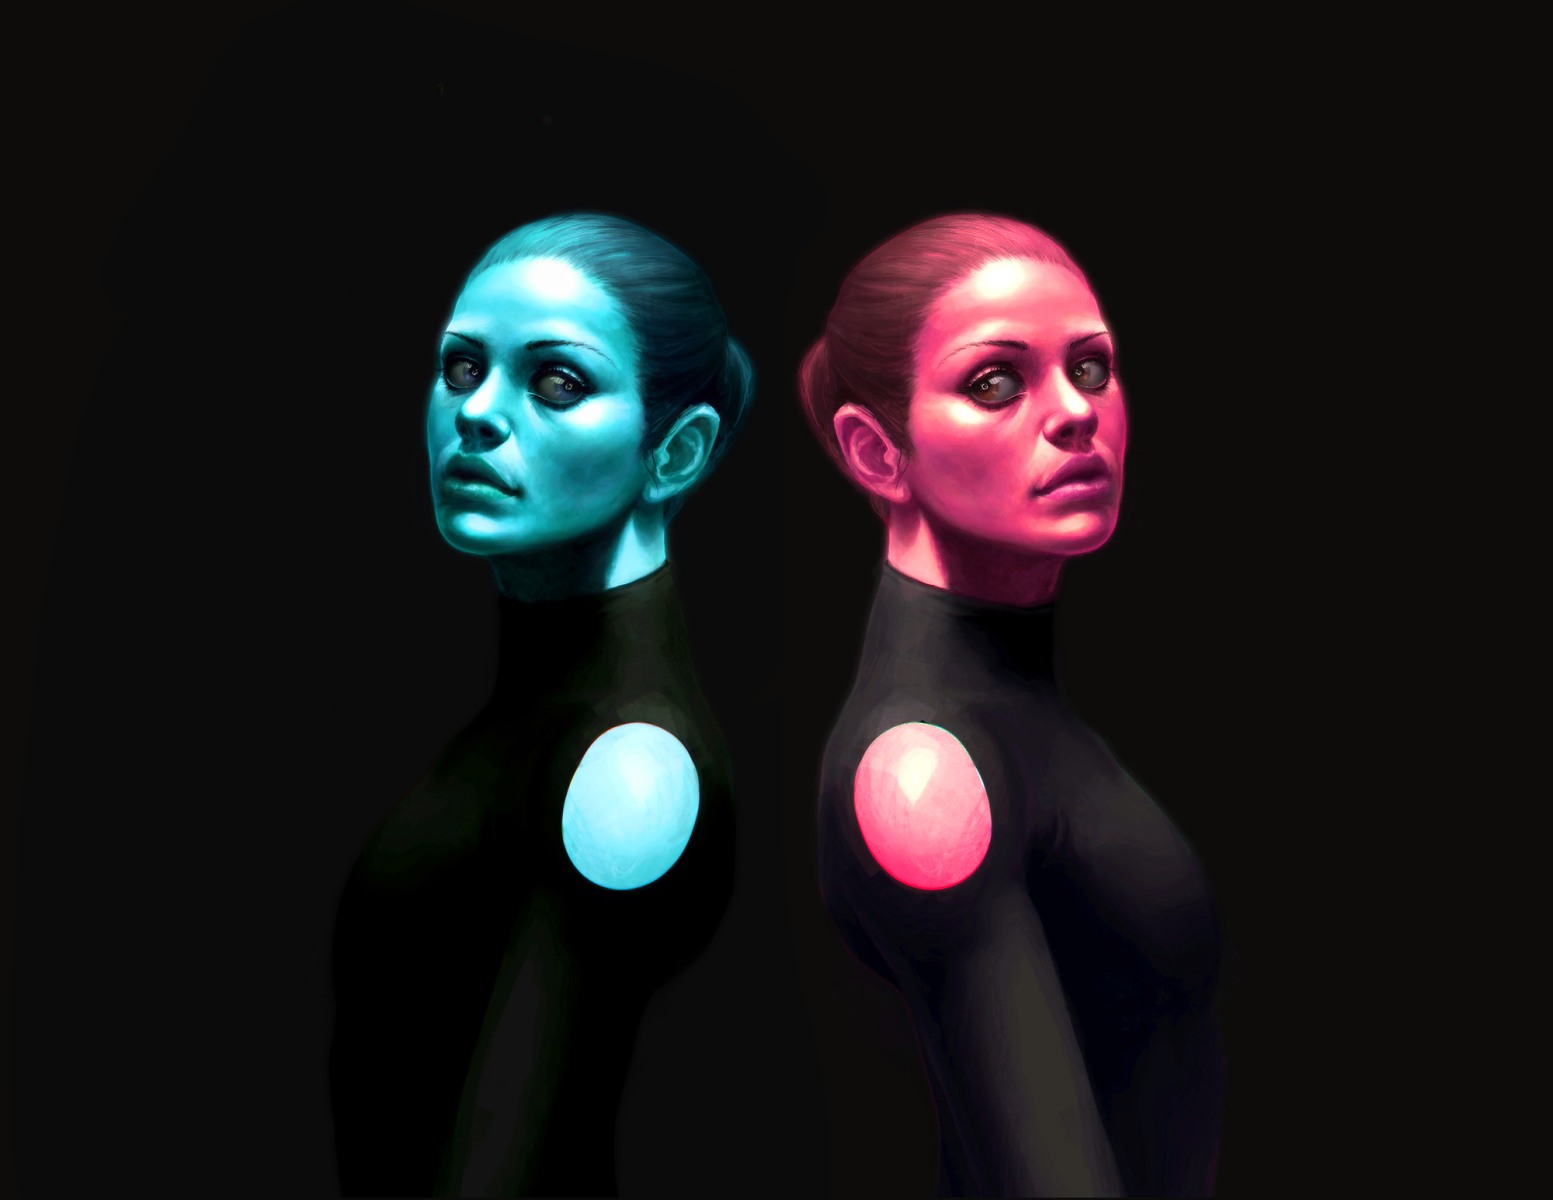 Digital painting of Lily from Black Swan. There are two mirror images of her: one is tinted blue and facing left; the other is tinted pink and facing right.